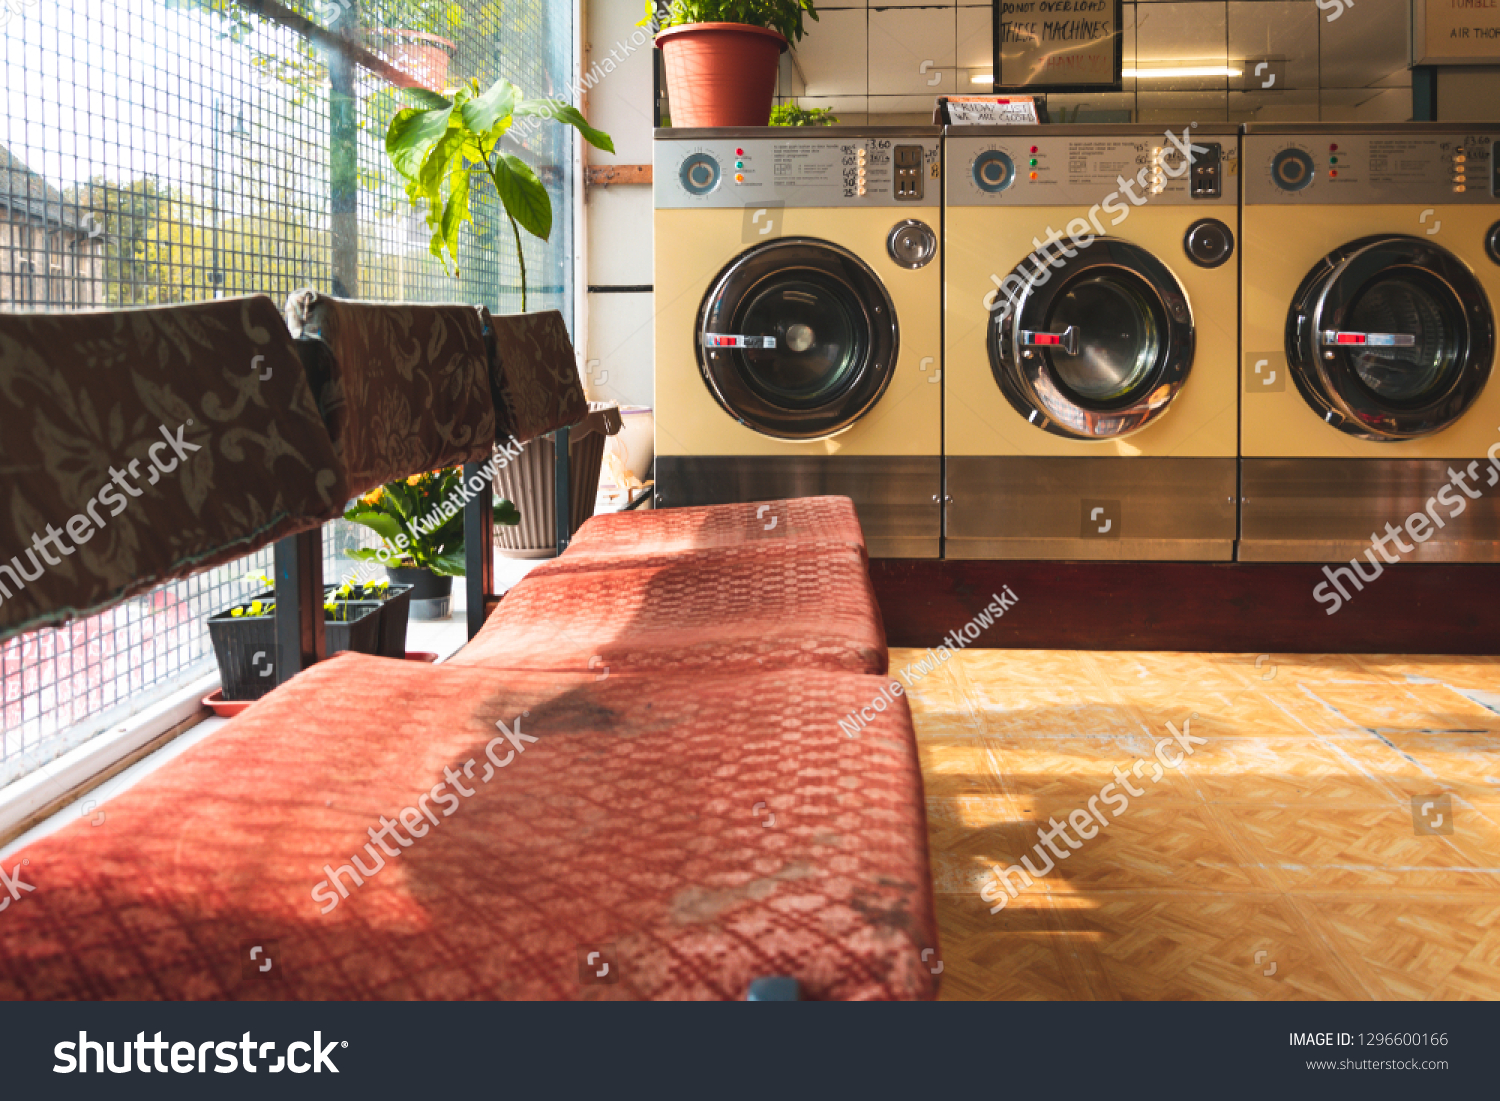 Coin-operated washing machines at a vintage laundromat #1296600166